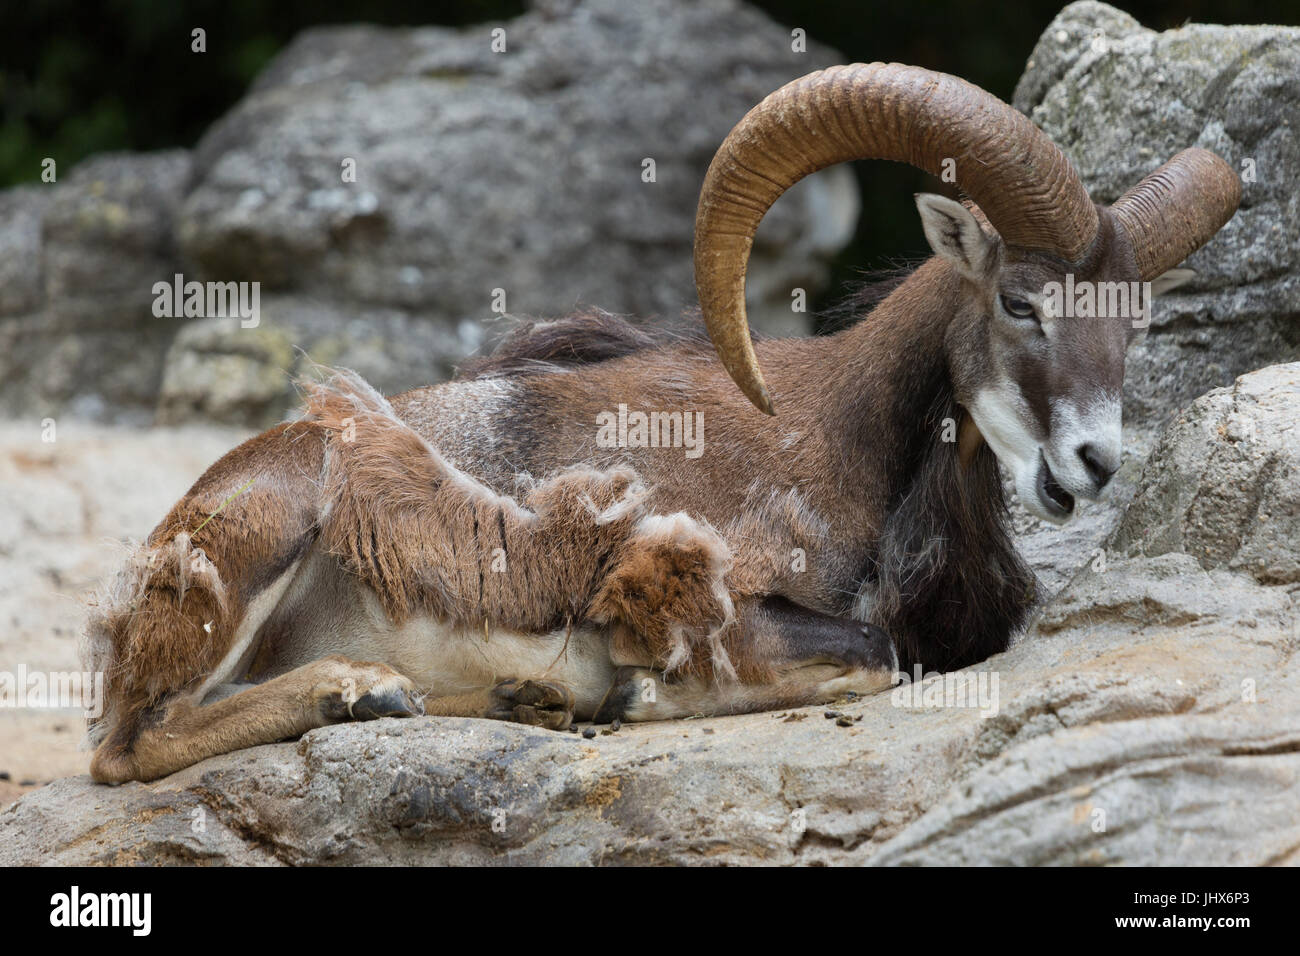 A photograph of a wild sheep, known as the Mouflon, sitting on some rocks and eating. Stock Photo